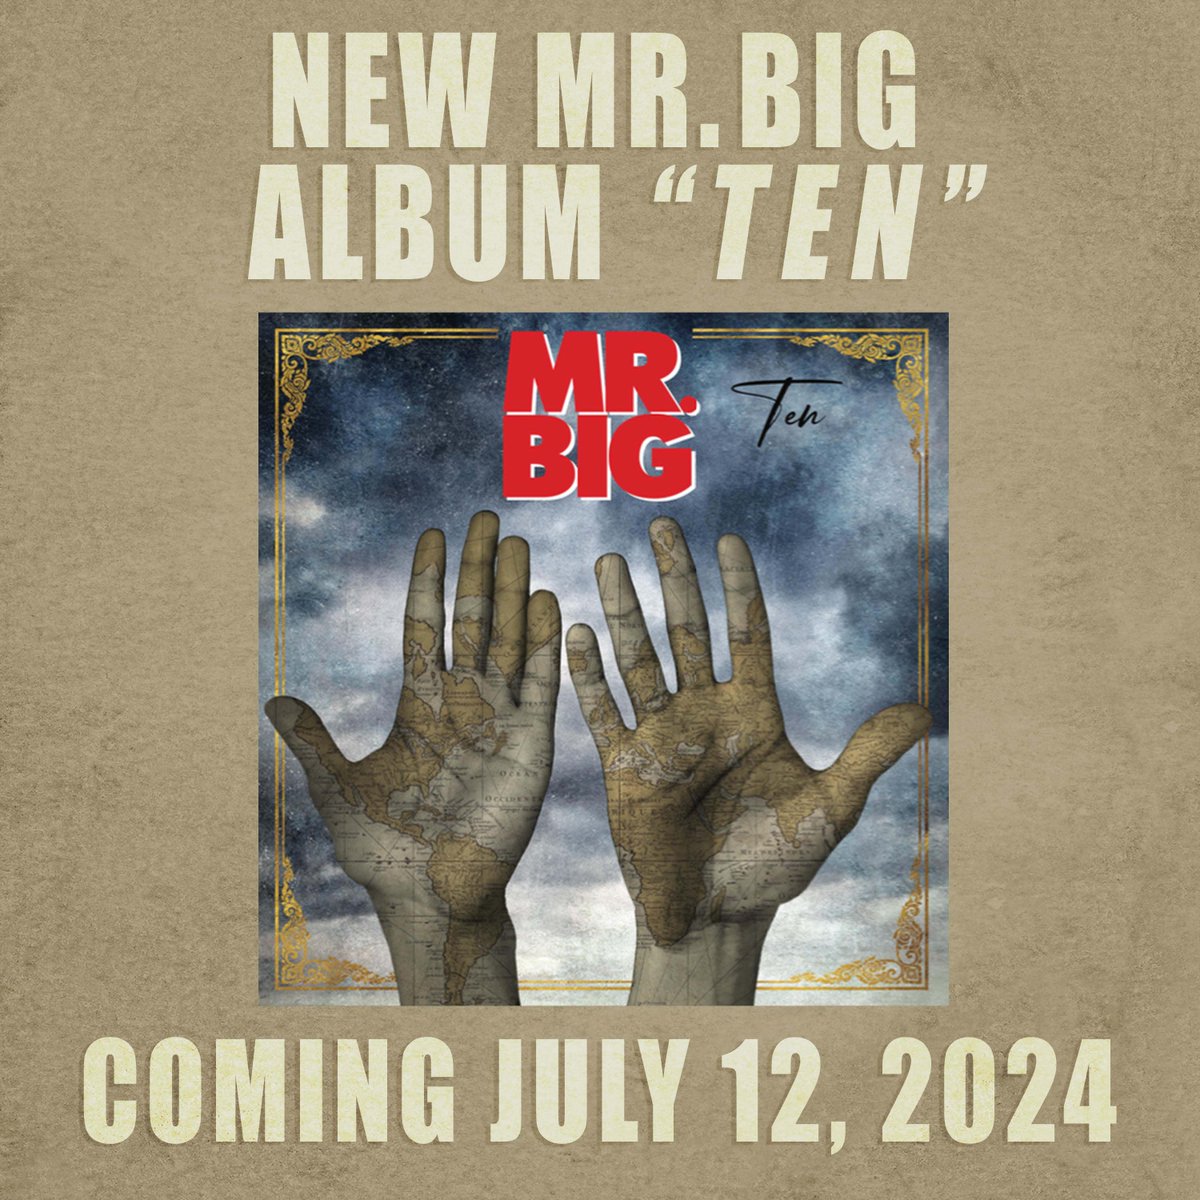 🎸 Get ready for some big news! 🌟 The legendary Mr. Big is back with a brand new album set to release on July 12th! 🎶 Stay tuned for more updates and mark your calendars for this epic comeback! 🚀 #MrBig #NewAlbum #ComingSoon 🎤🎸